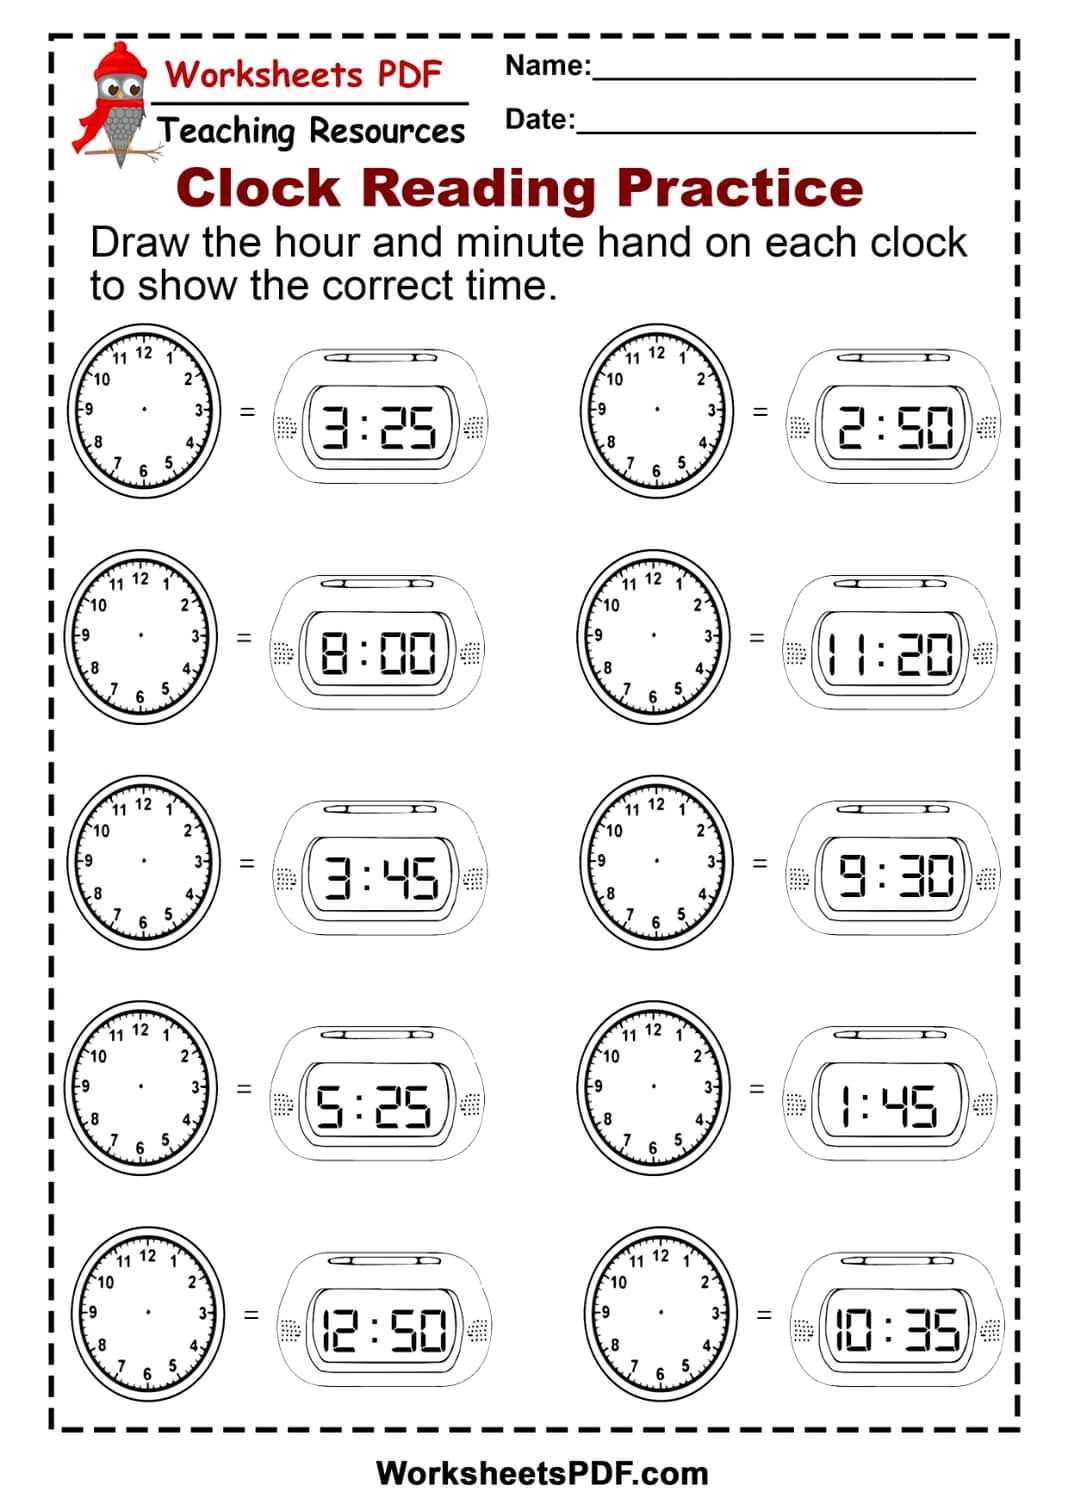 pdf-worksheets-telling-the-time